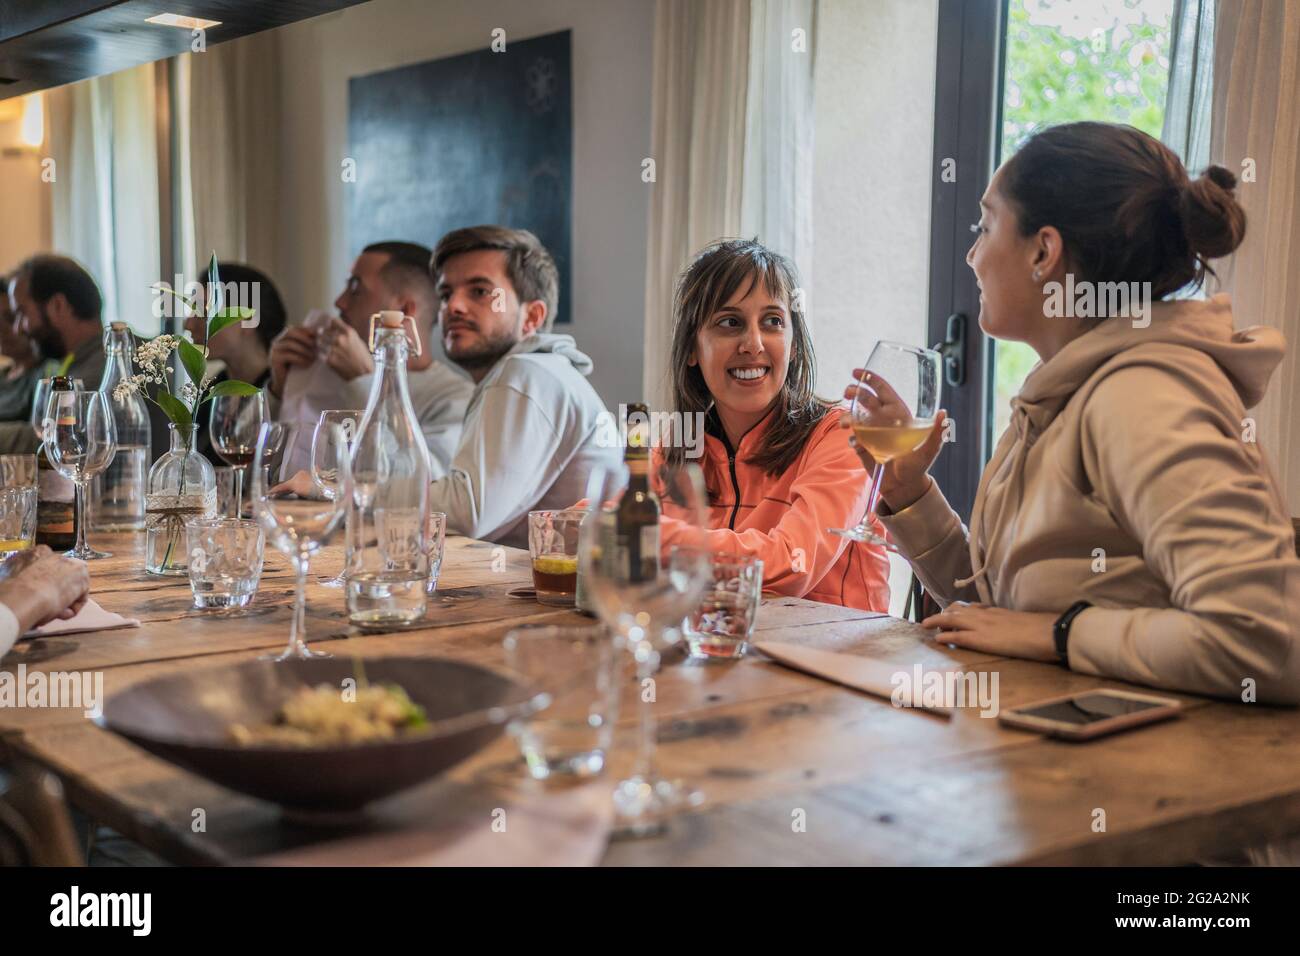 Smiling joyful people spending time and enjoying at table with glasses celebrating in light room Stock Photo